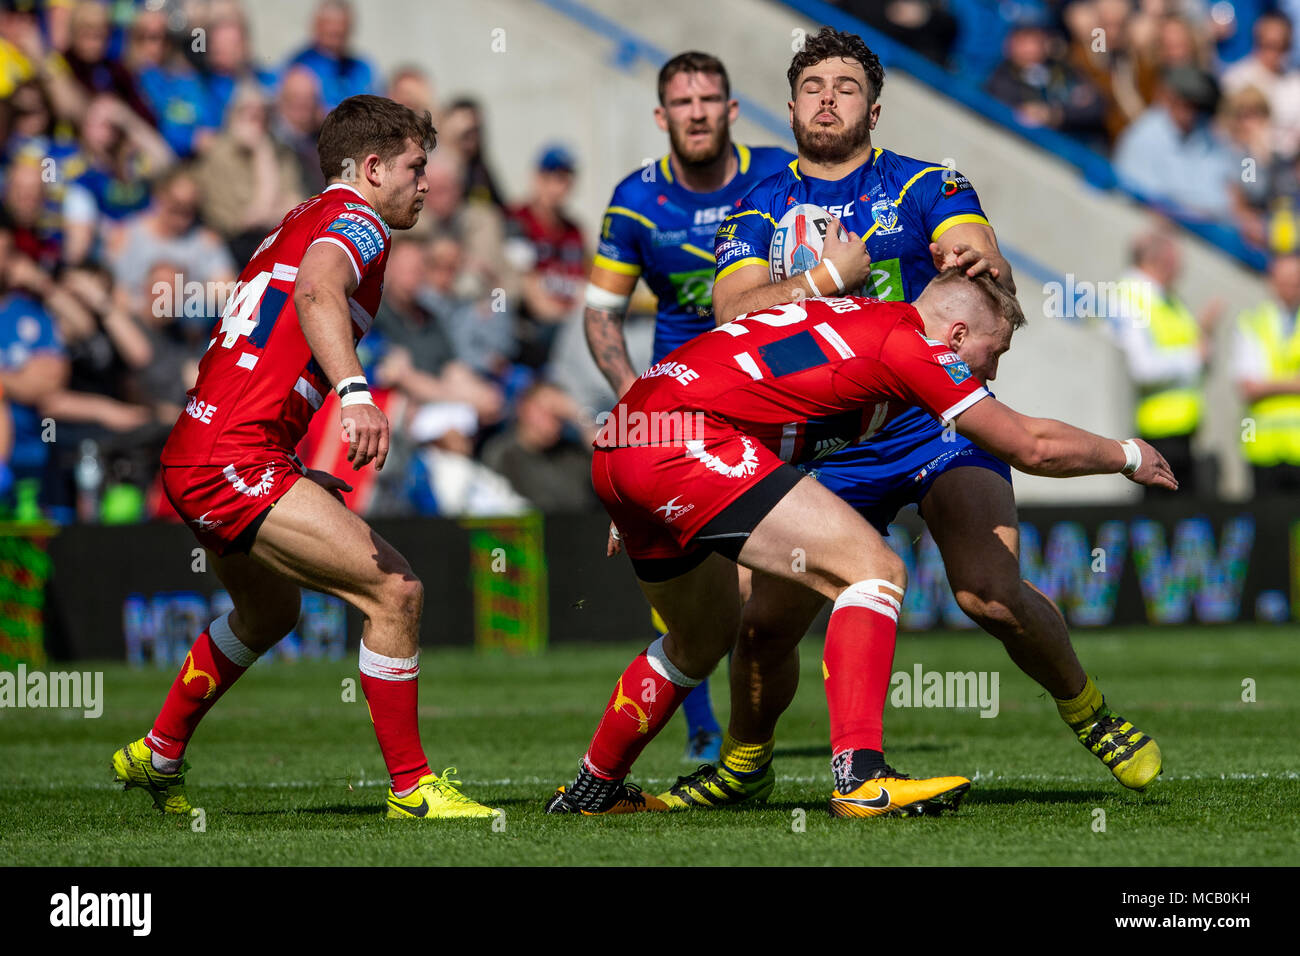 Warrington Wolves's Joe Philbin is tackled by  Hull's James Greenwood  14th April 2018 , The Halliwell Jones Stadium Mike Gregory Way, Warrington, WA2 7NE, England;  Betfred Super League rugby, Round 11, Warrington Wolves v Hull Kingston Rovers Stock Photo